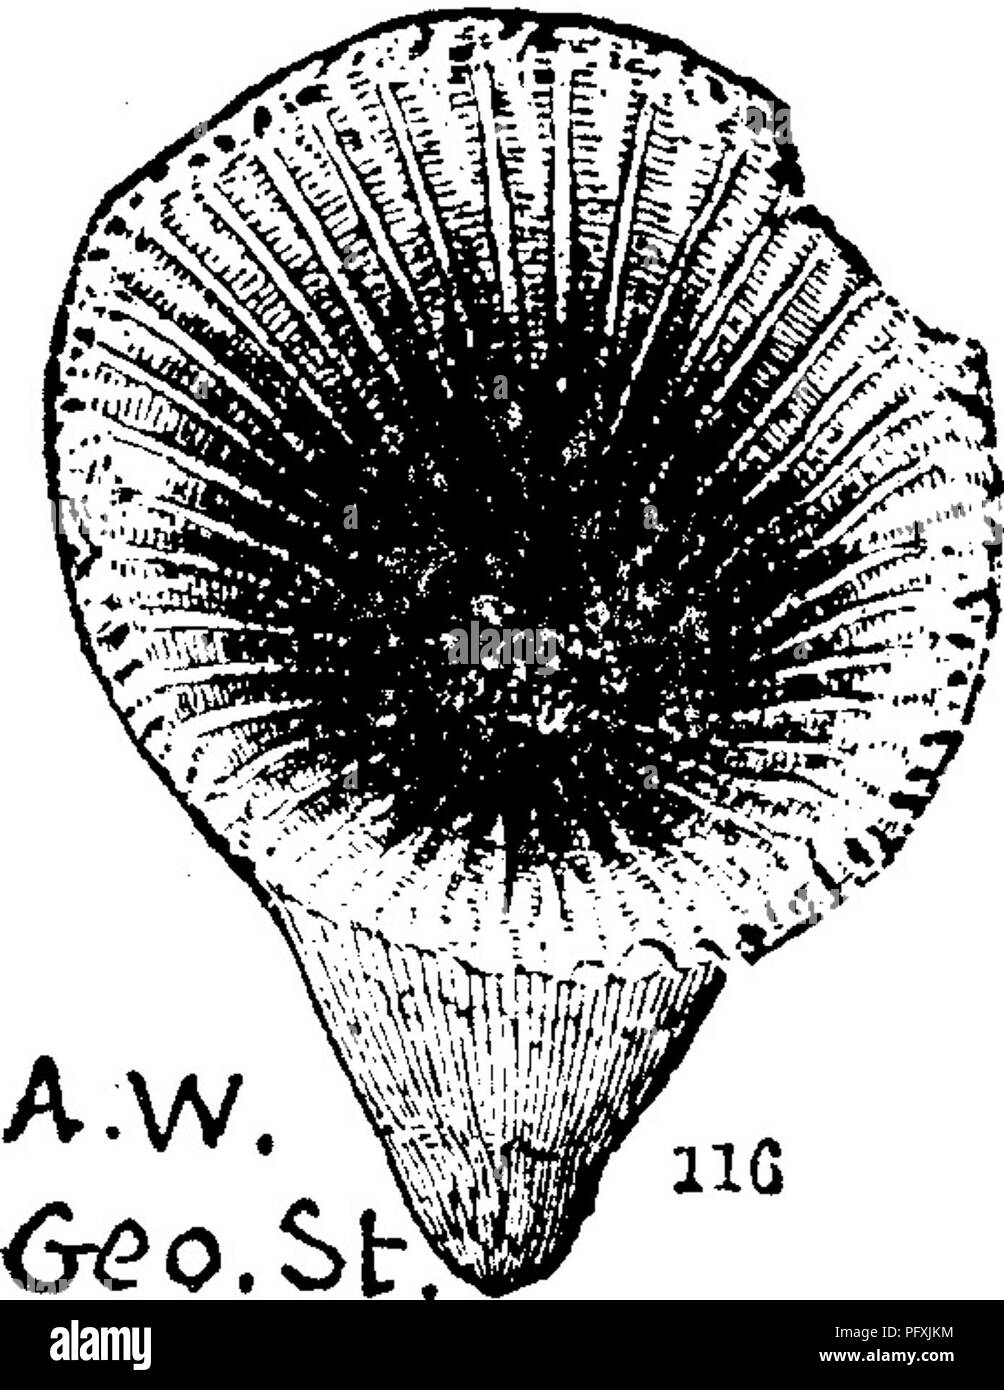 . A dictionary of the fossils of Pennsylvania and neighboring states named in the reports and catalogues of the survey ... Paleontology. Indmx narrow; lamelL'B 120, alternating in length, the longer ones becoming bundles as they near the hottom,— Corniferous lime- stone at Falls of Ohio.— VIII a, Cyathophayllum concentricum. (Hall, 35th An. Kt.N. Y. Mils. 1882, page 146.) Collett's In- diana Et. 1882, page 316, plate 21, fig. 1.— fossette extends from near center to front margin; lamellae 100, of nearly uniform size at margin, alternating below; when skinned the specimen shows internal striae  Stock Photo